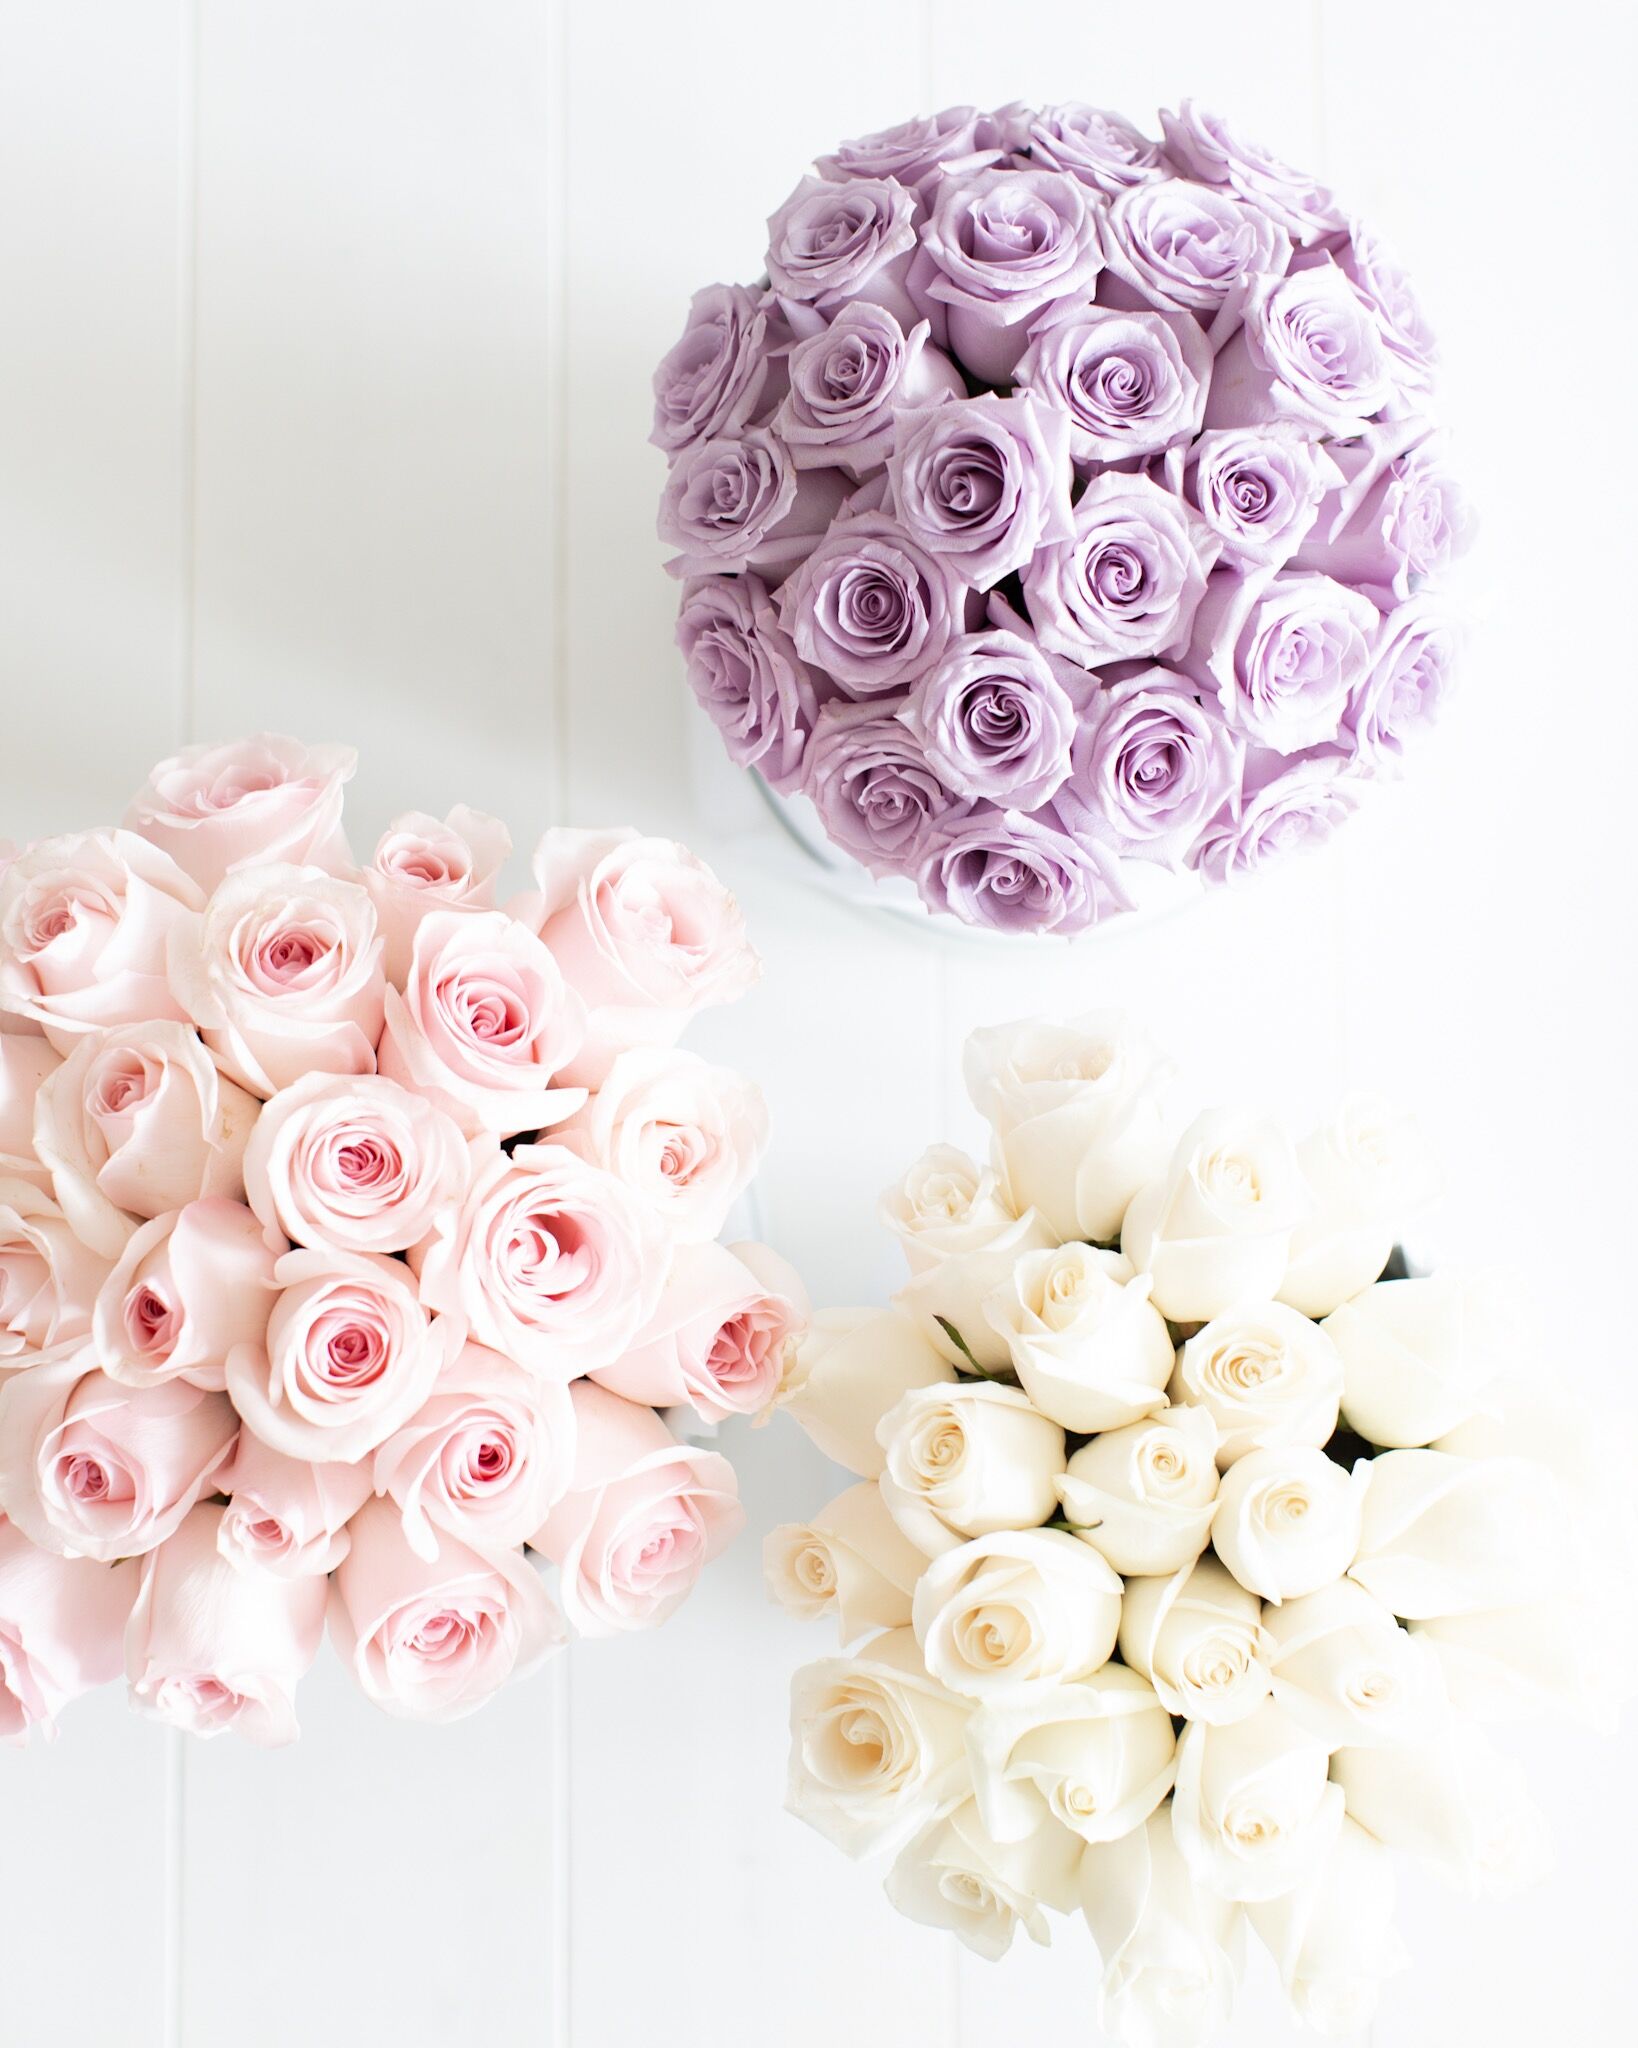 Landeau Roses Mother's Day Giveaway